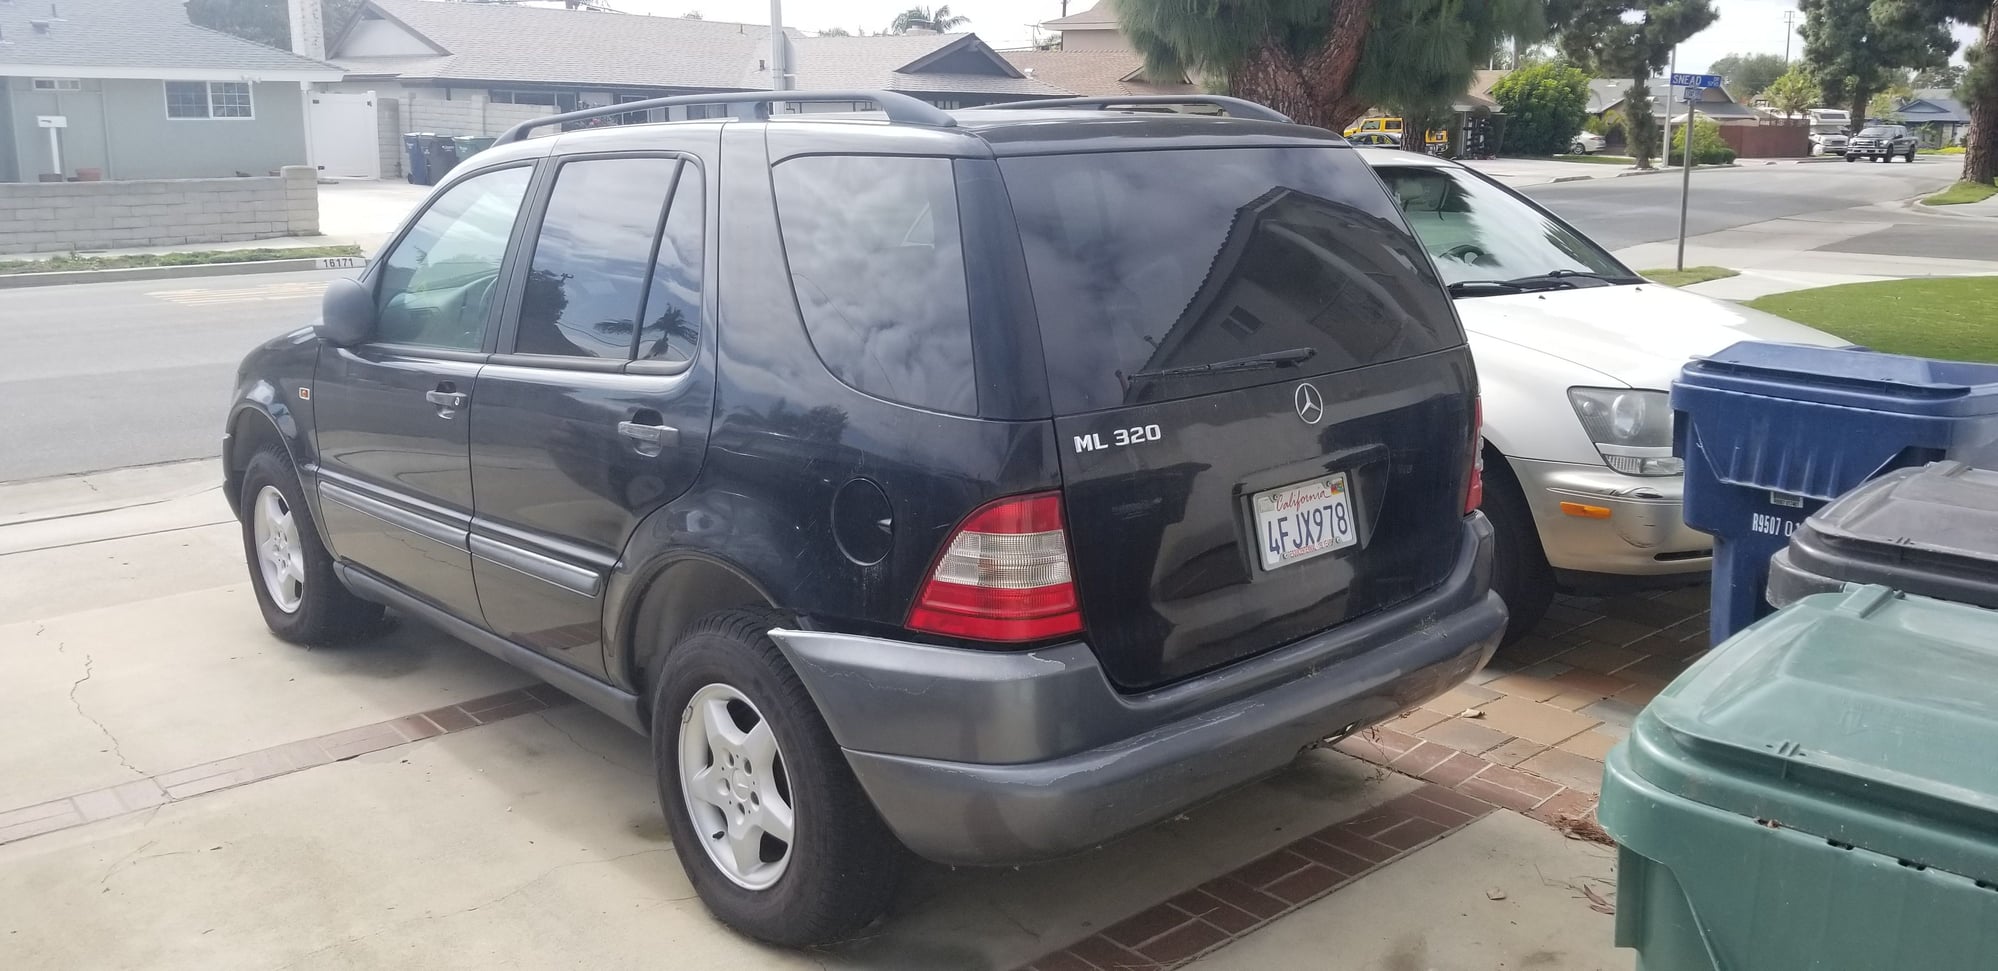 1999 Mercedes-Benz ML320 - $1000   1999 MBZ ML-320 168,200 in Calif Parting Out or Sell Whole - Used - VIN 4jgab54e2xa109562 - 168,200 Miles - 6 cyl - AWD - Automatic - SUV - Black - Huntington Beach, CA 92649, United States